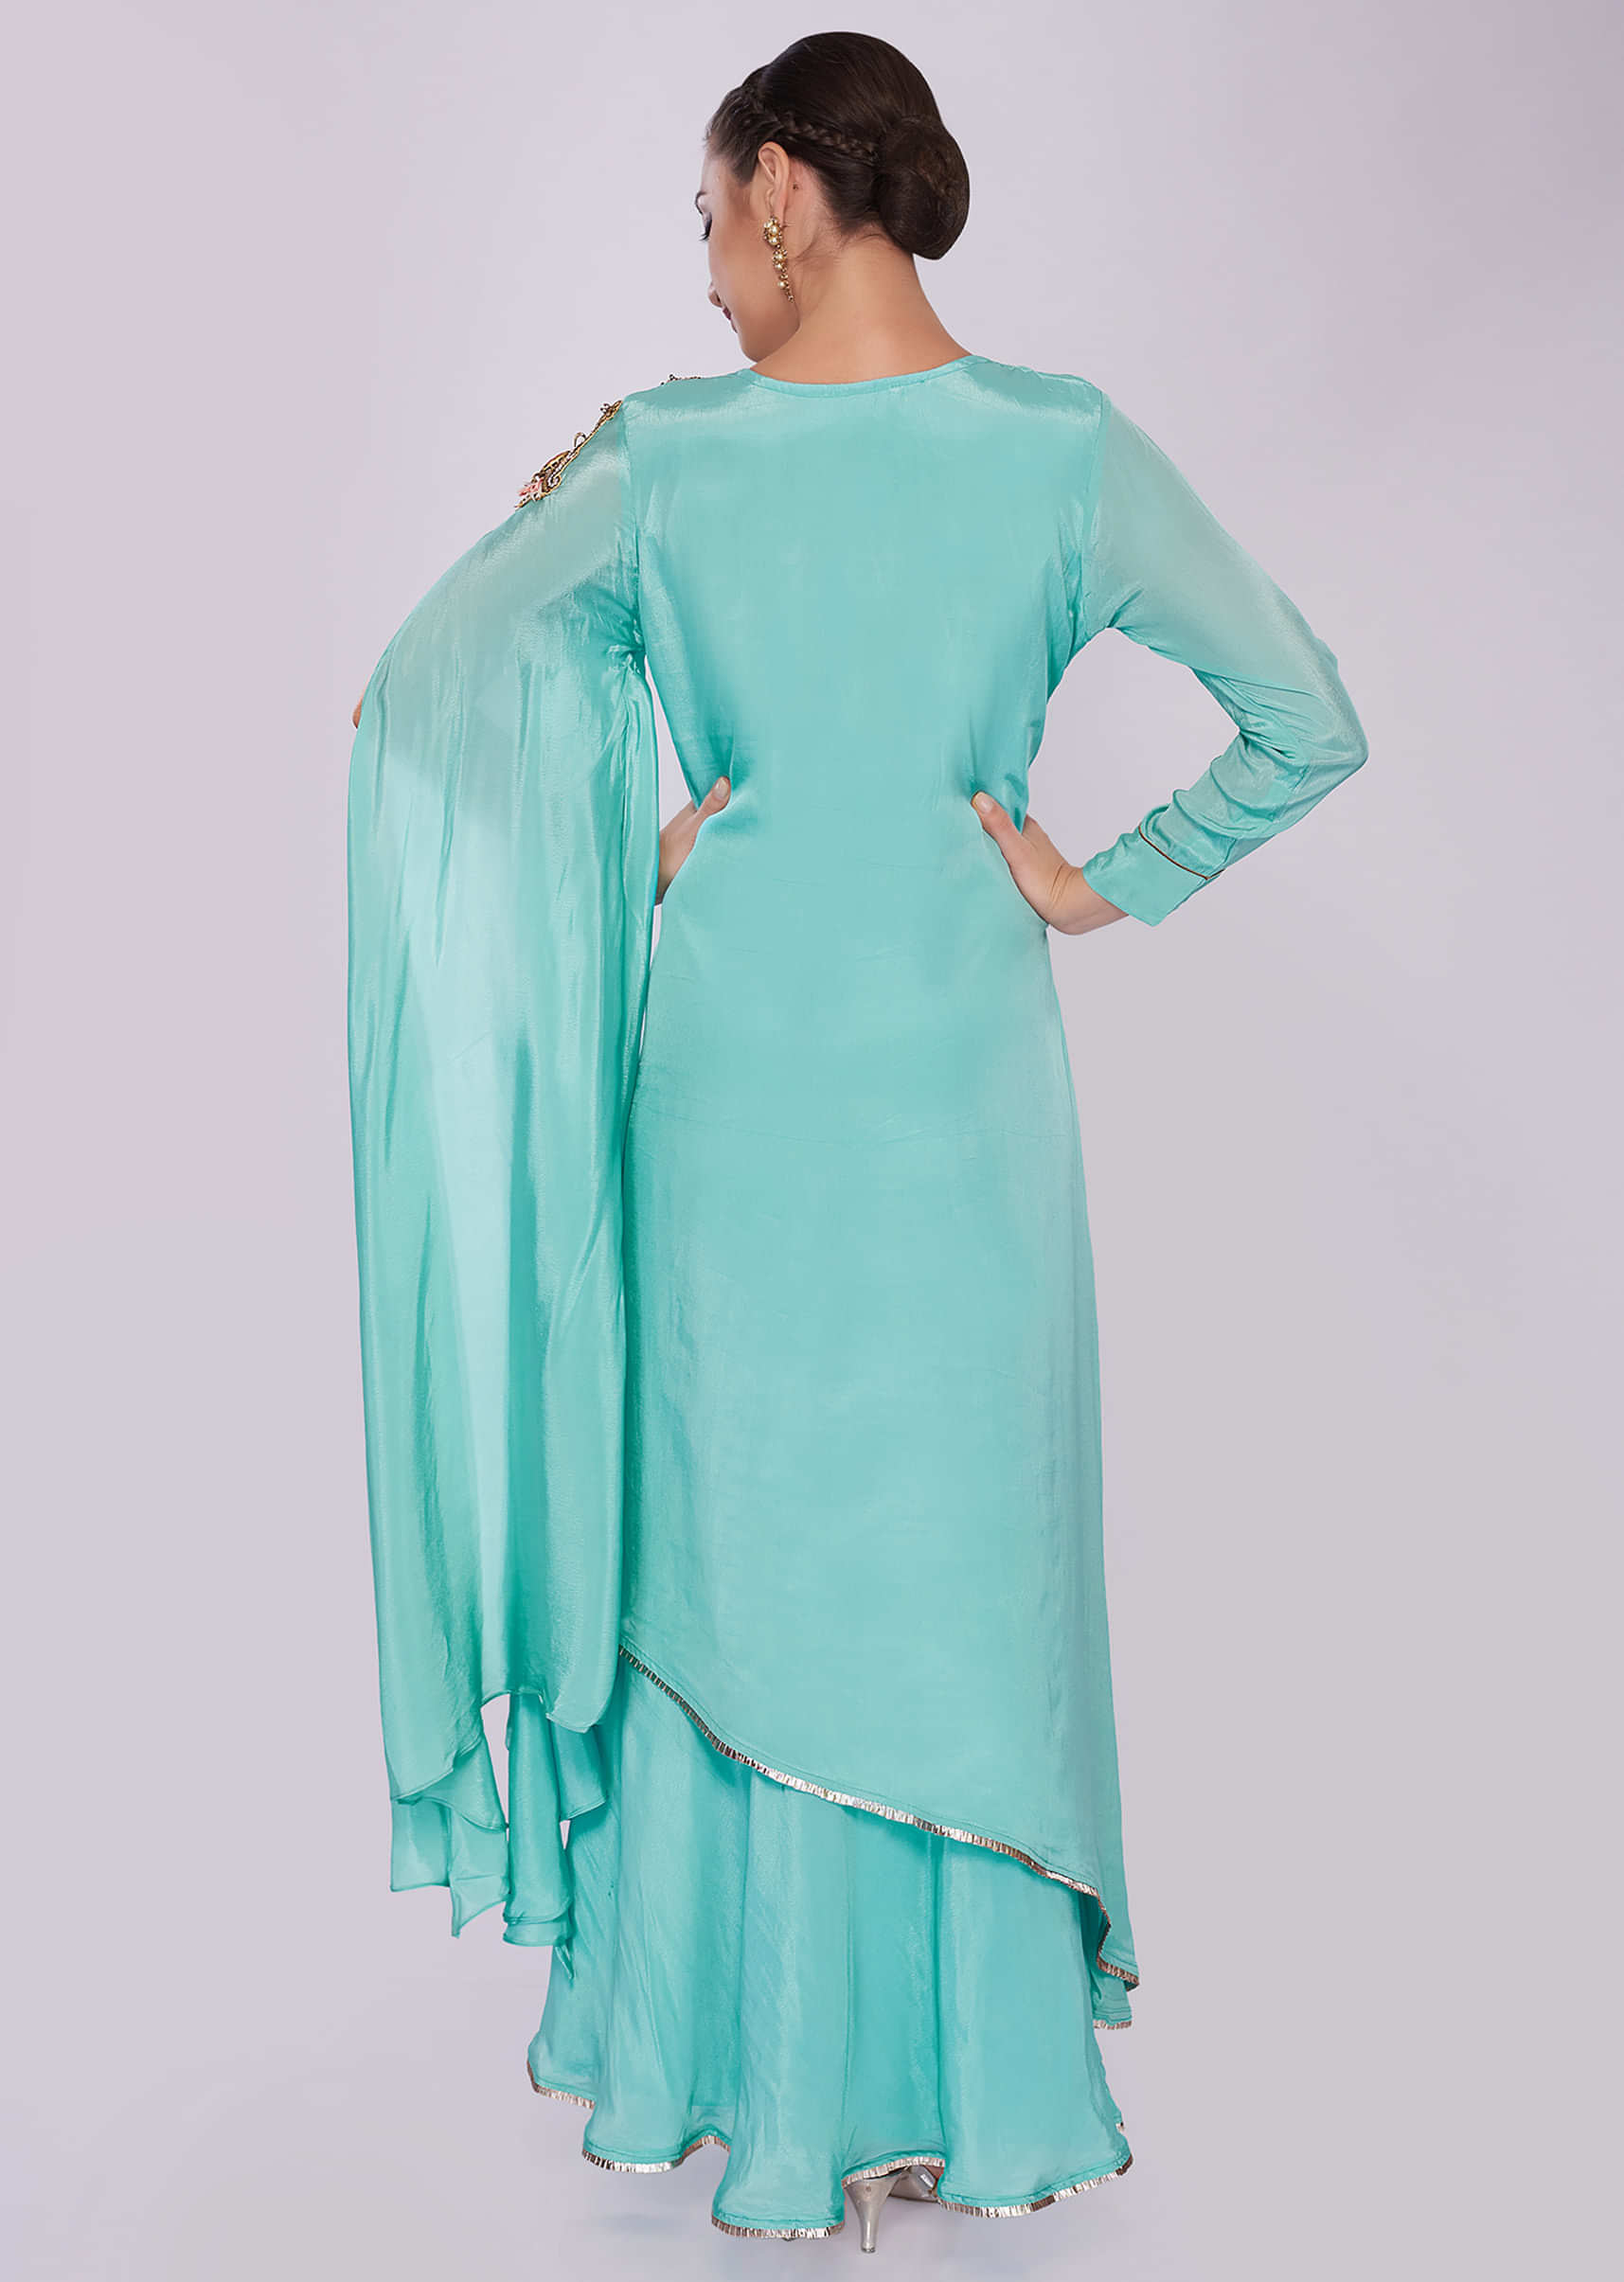 Sky blue double layer tunic dress featuring in satin crepe